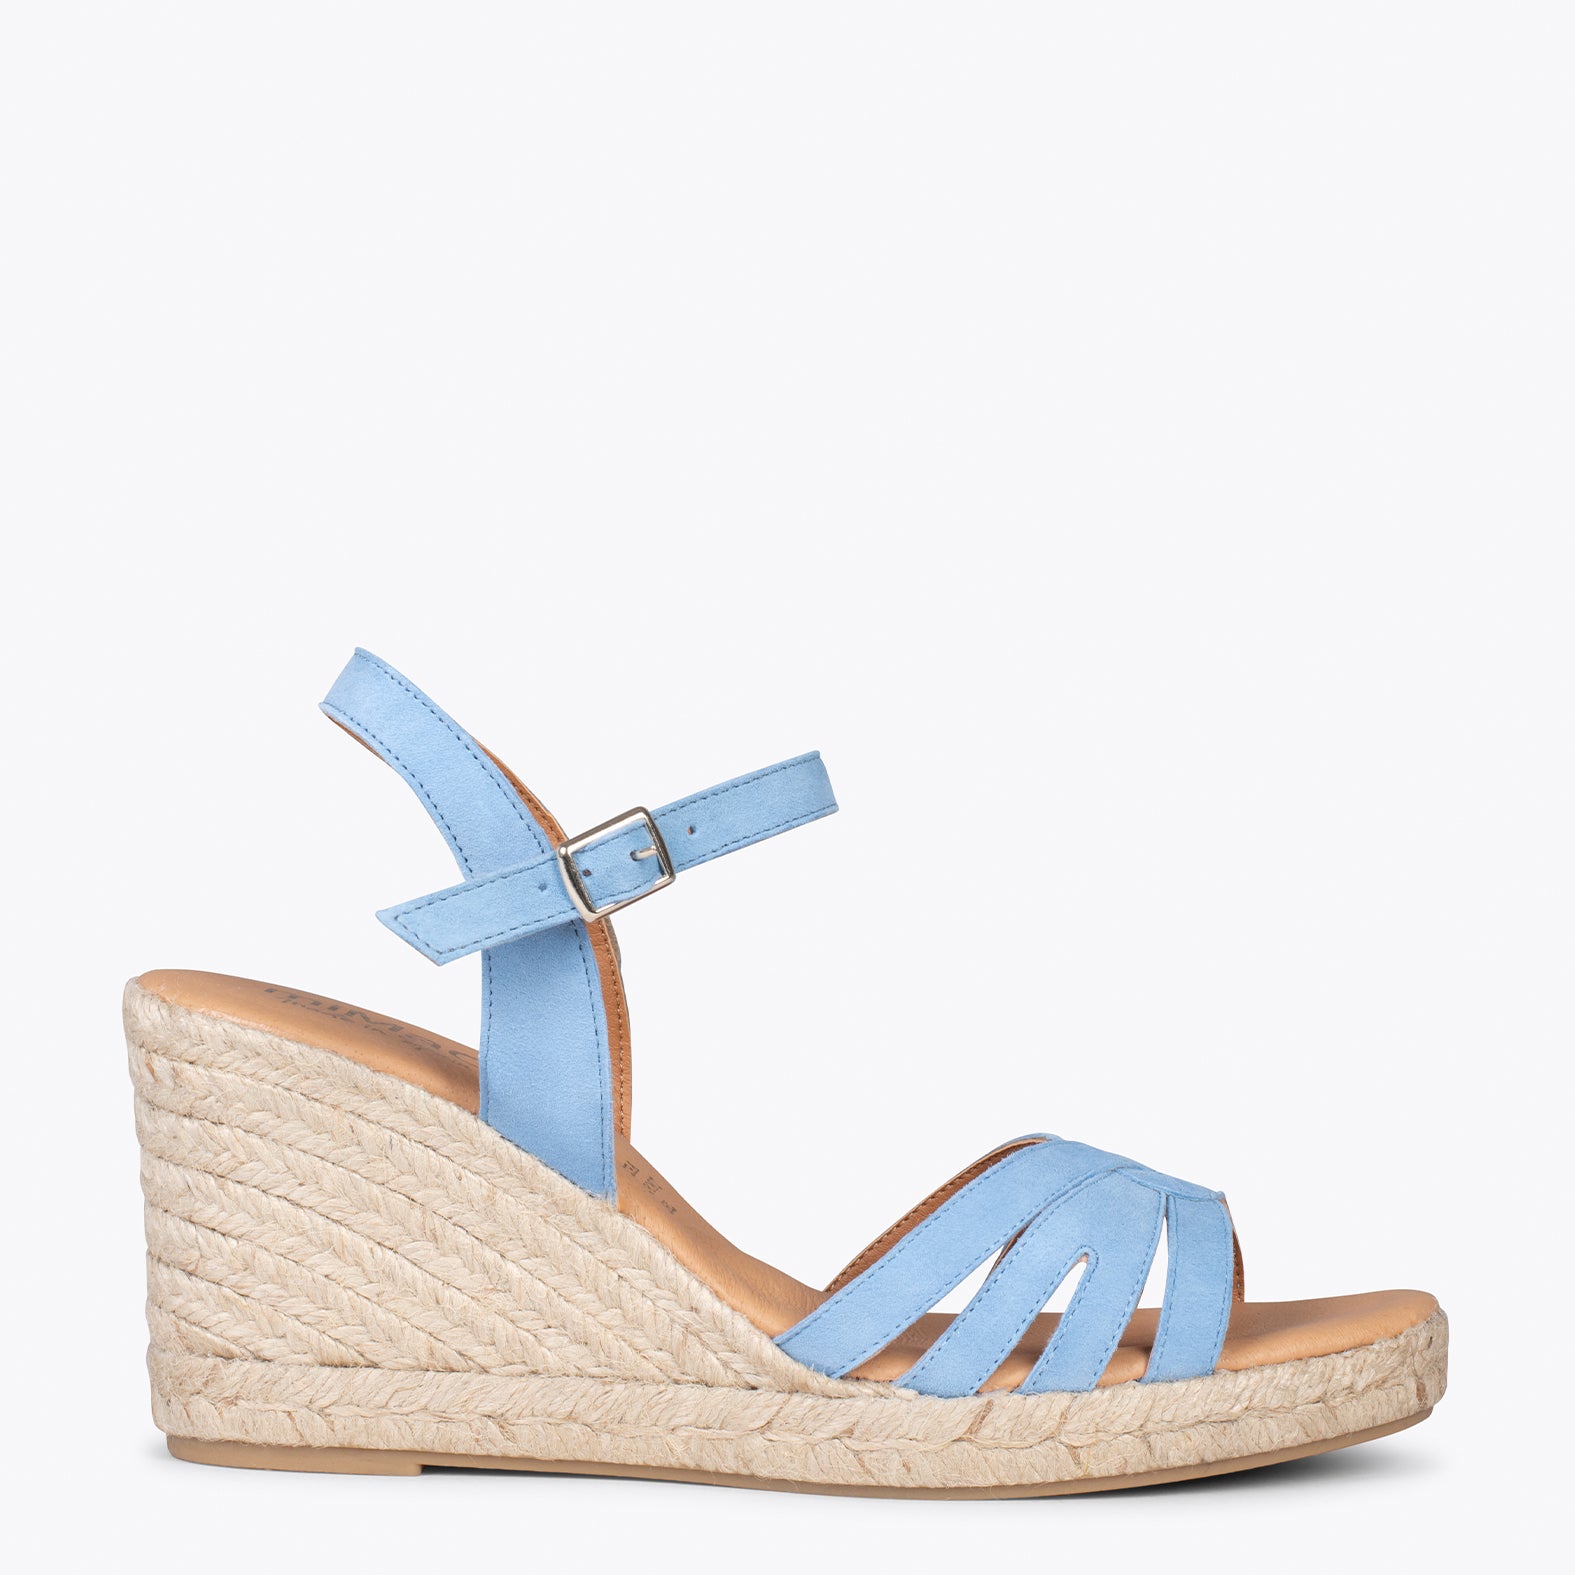 HOYAMBRE – BABY BLUE espadrilles with braided front